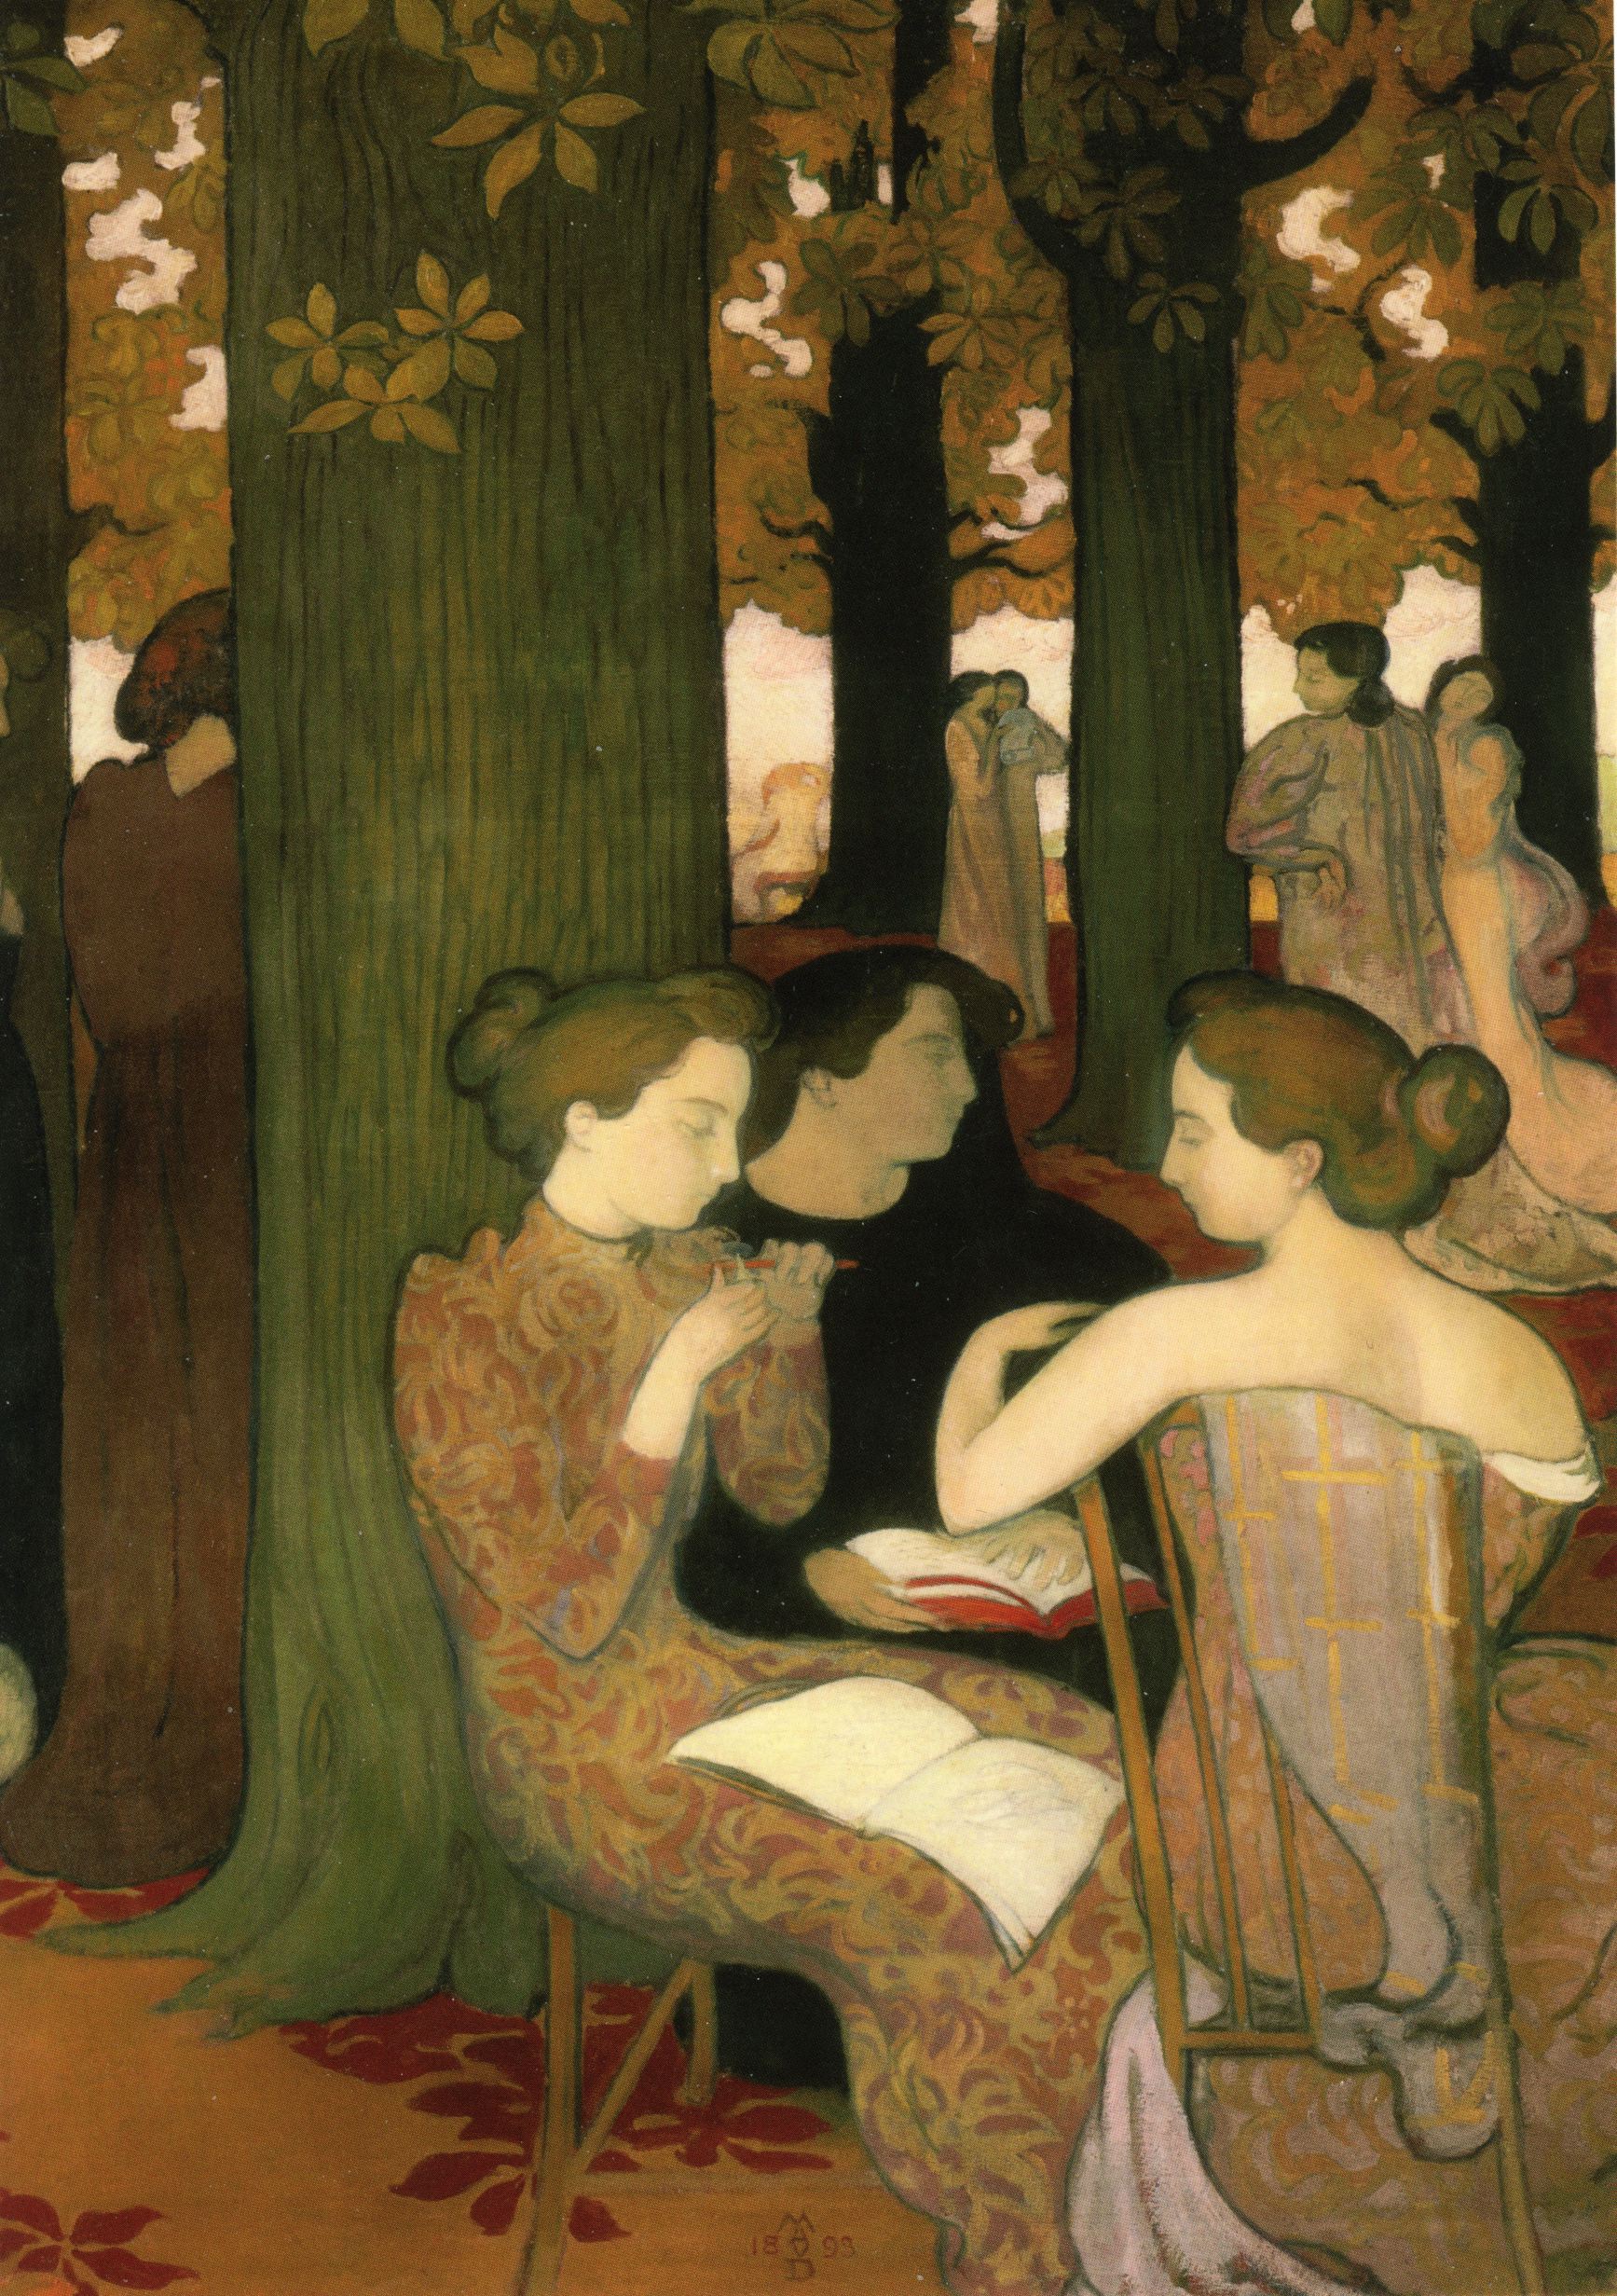 Musen by Maurice Denis - 1893 - 171,5 x 137,5 cm Musée d'Orsay